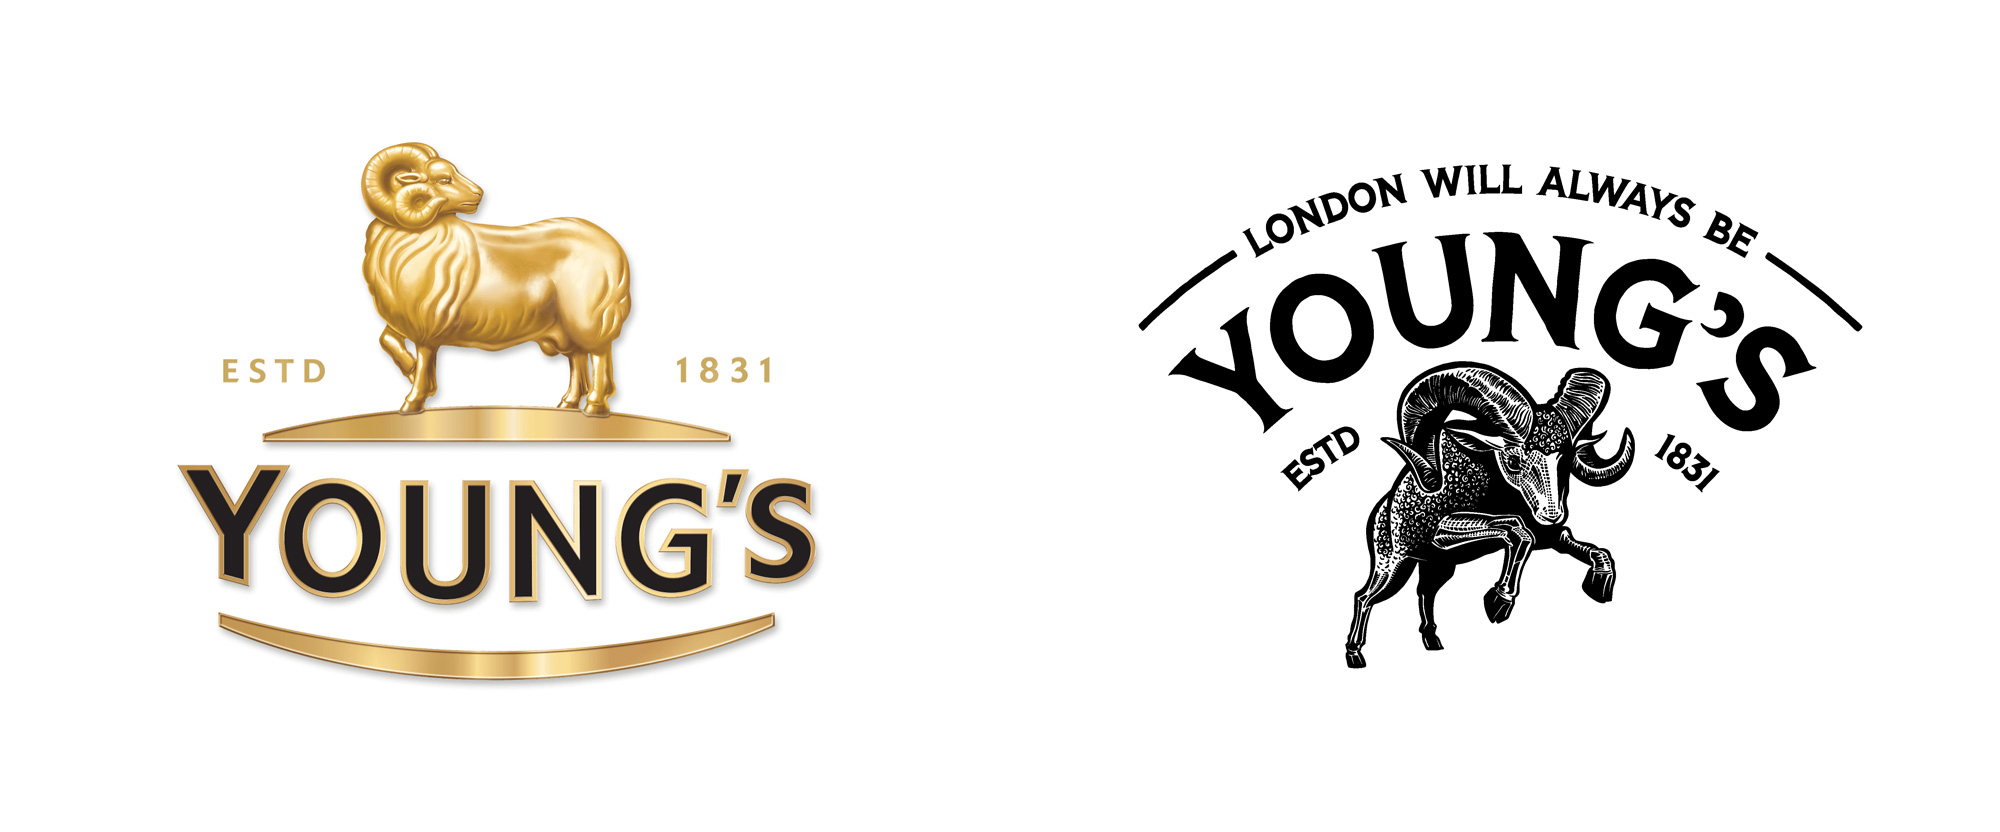 New Logo and Packaging for Young’s by Kingdom & Sparrow